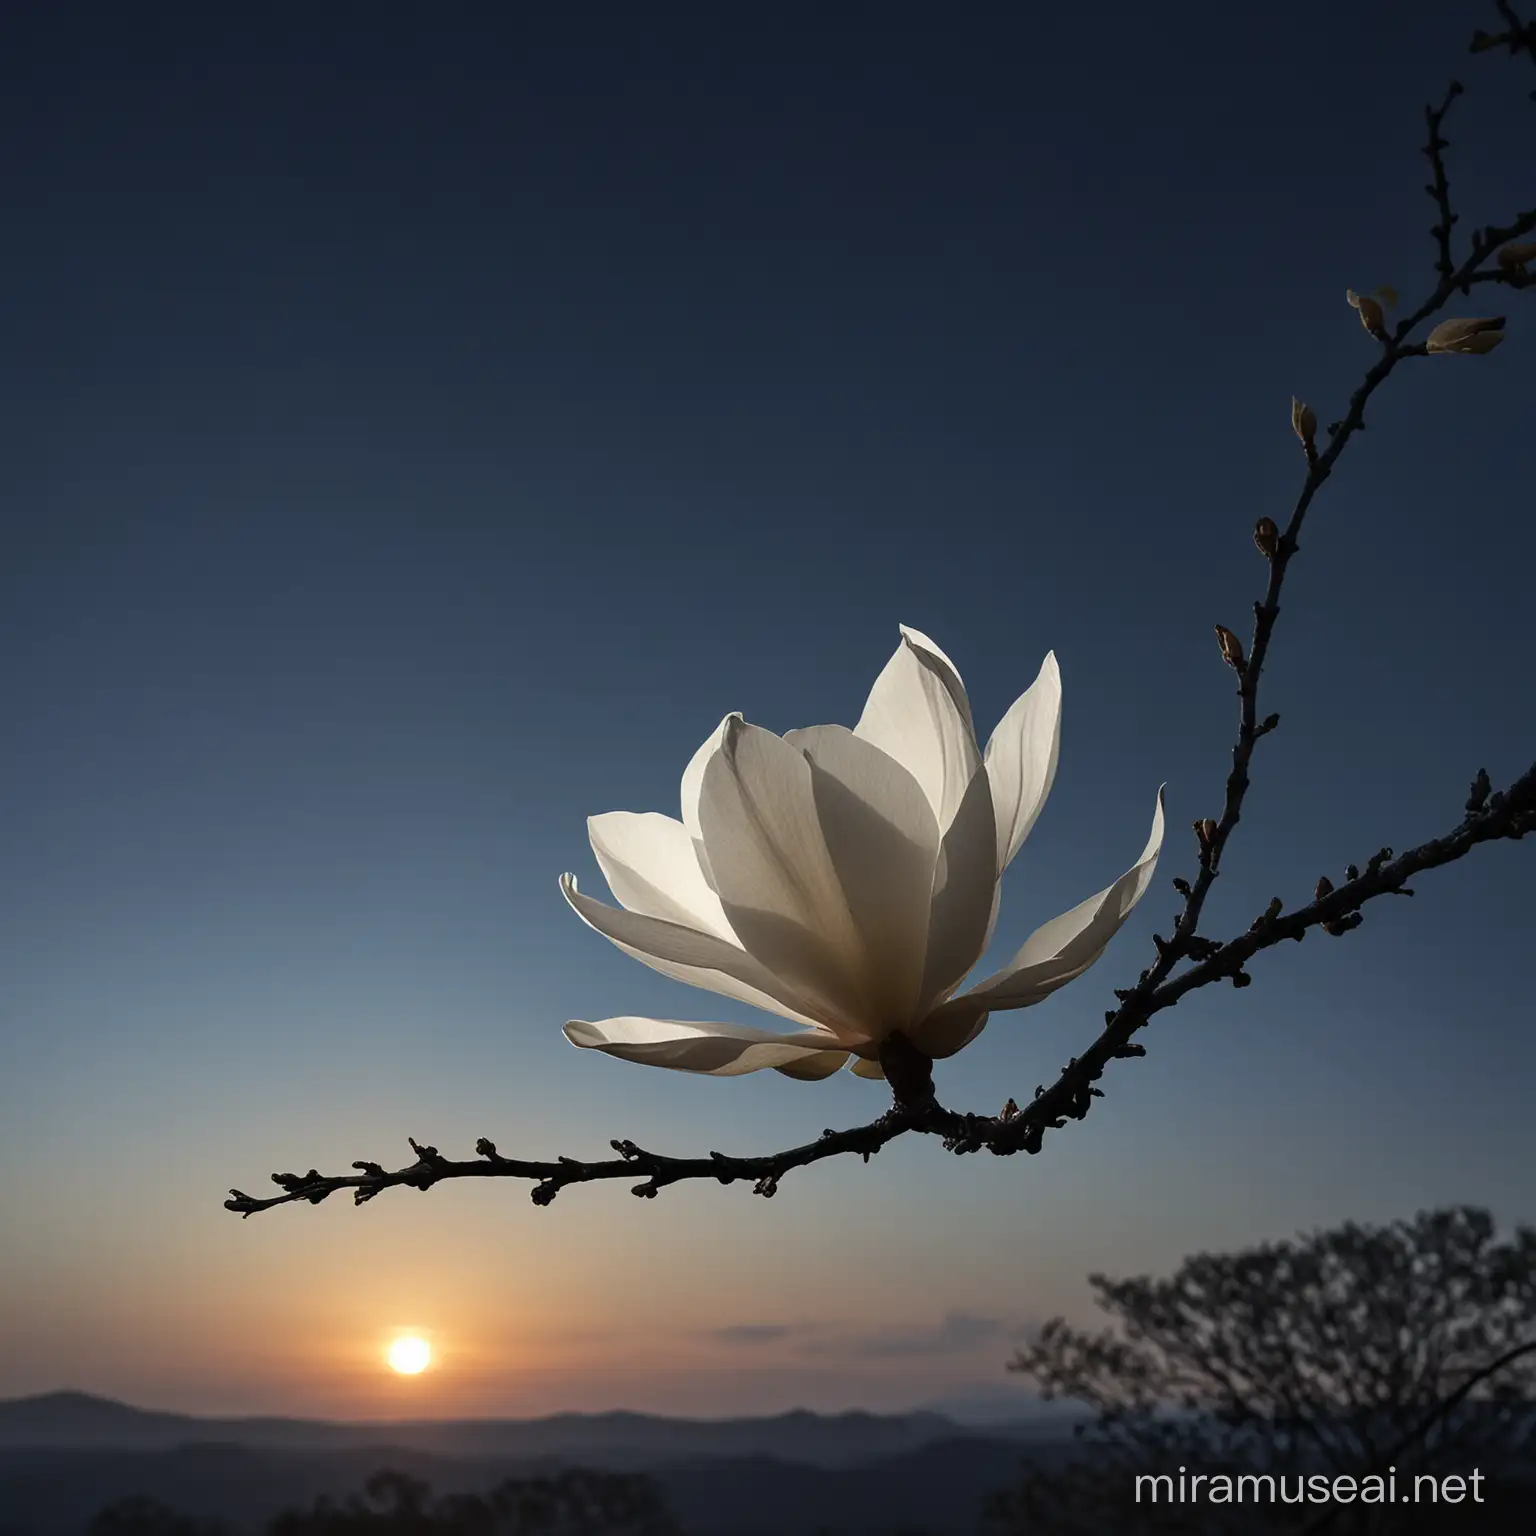 captivating magnolia flower perched gracefully on its branch, set against a contrasting background of deep indigo twilight. The flower stands out vividly against the darkening sky, its delicate form illuminated by the last rays of the setting sun, creating a stunning juxtaposition of light and shadow